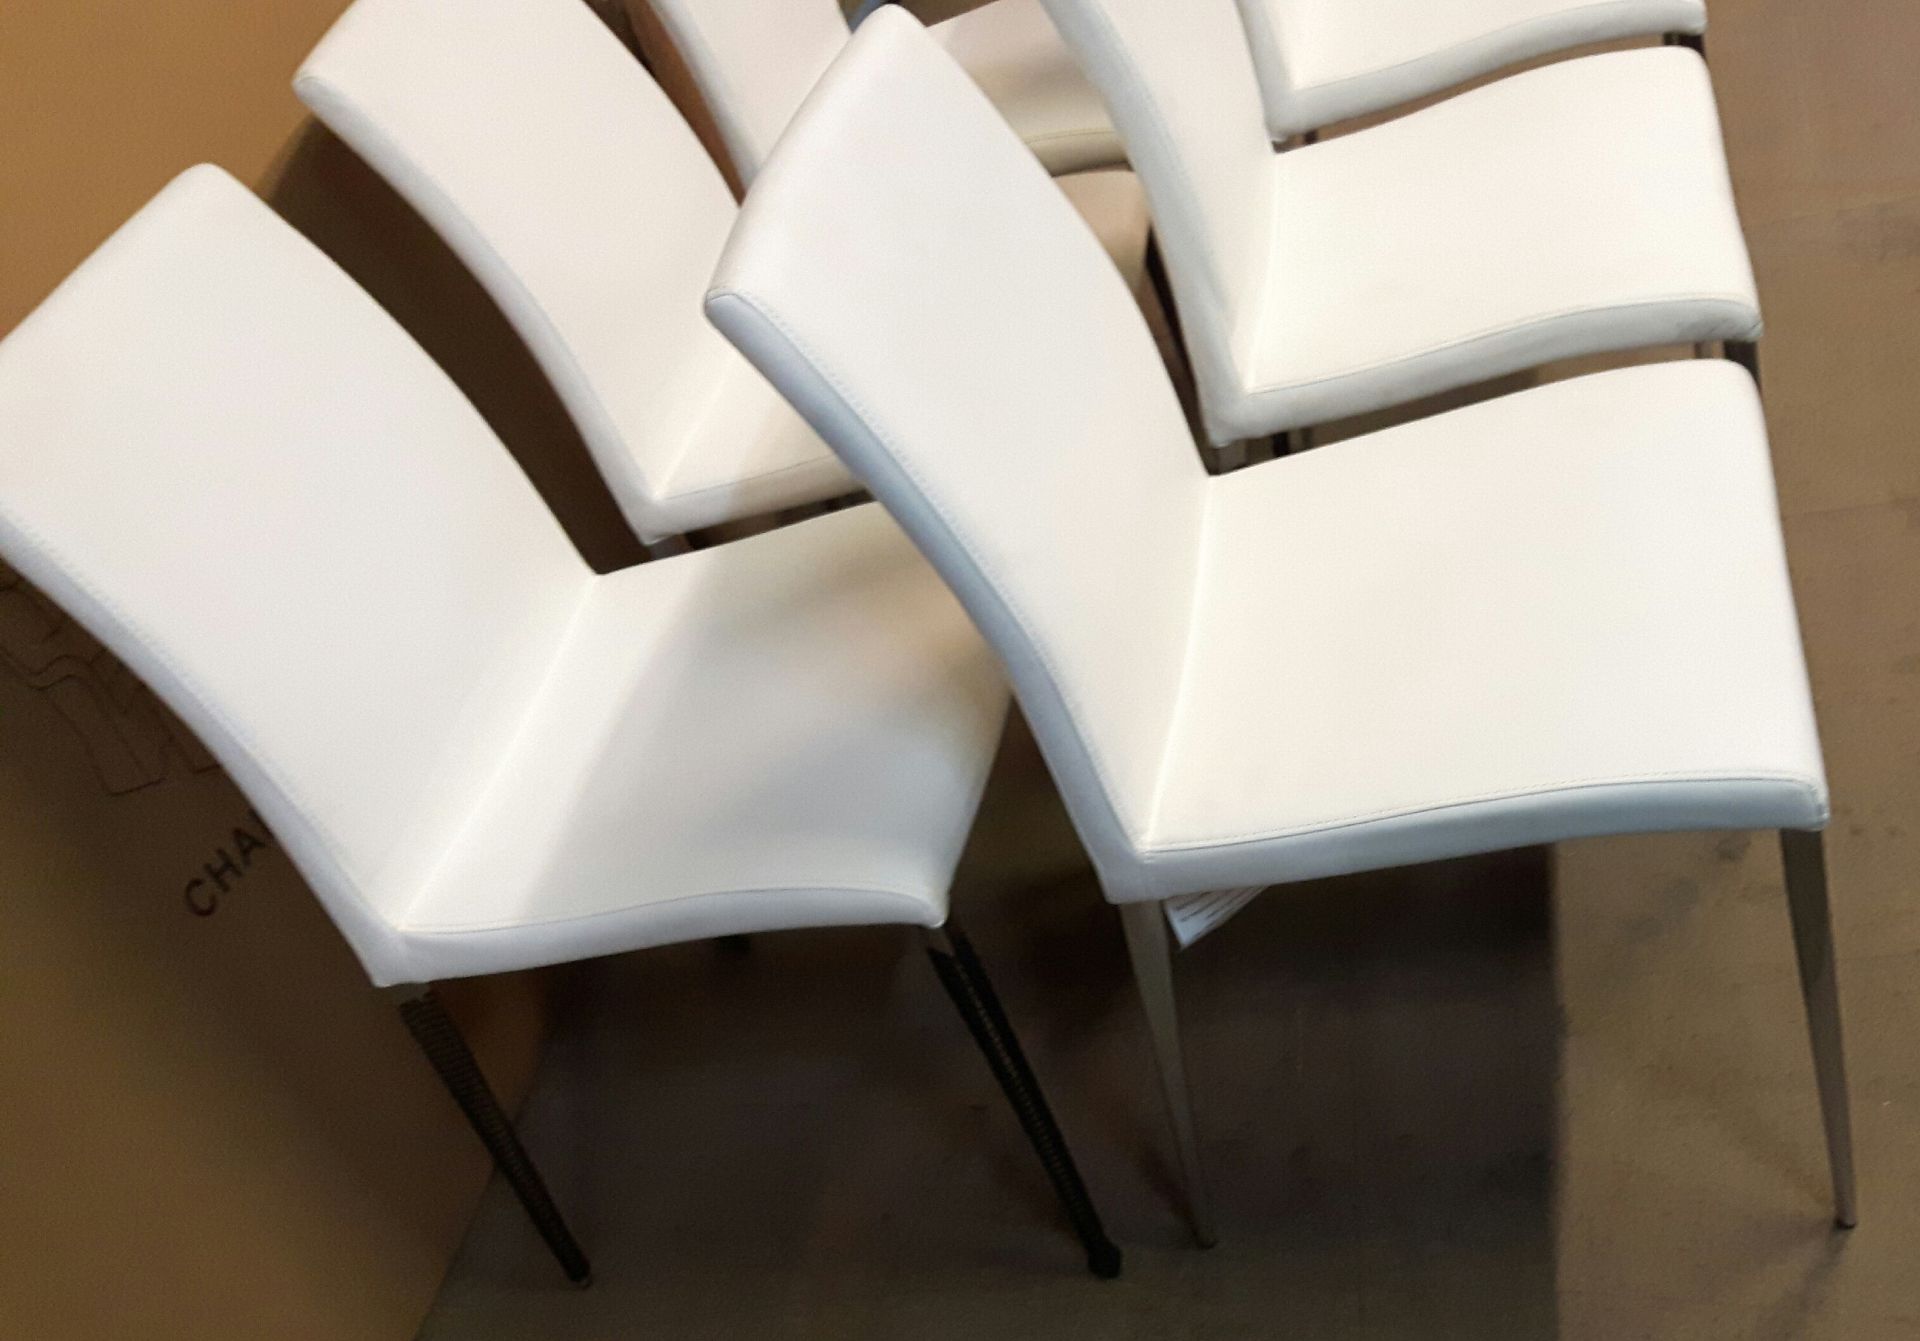 6 X Elise Dining Chairs White - Image 6 of 7